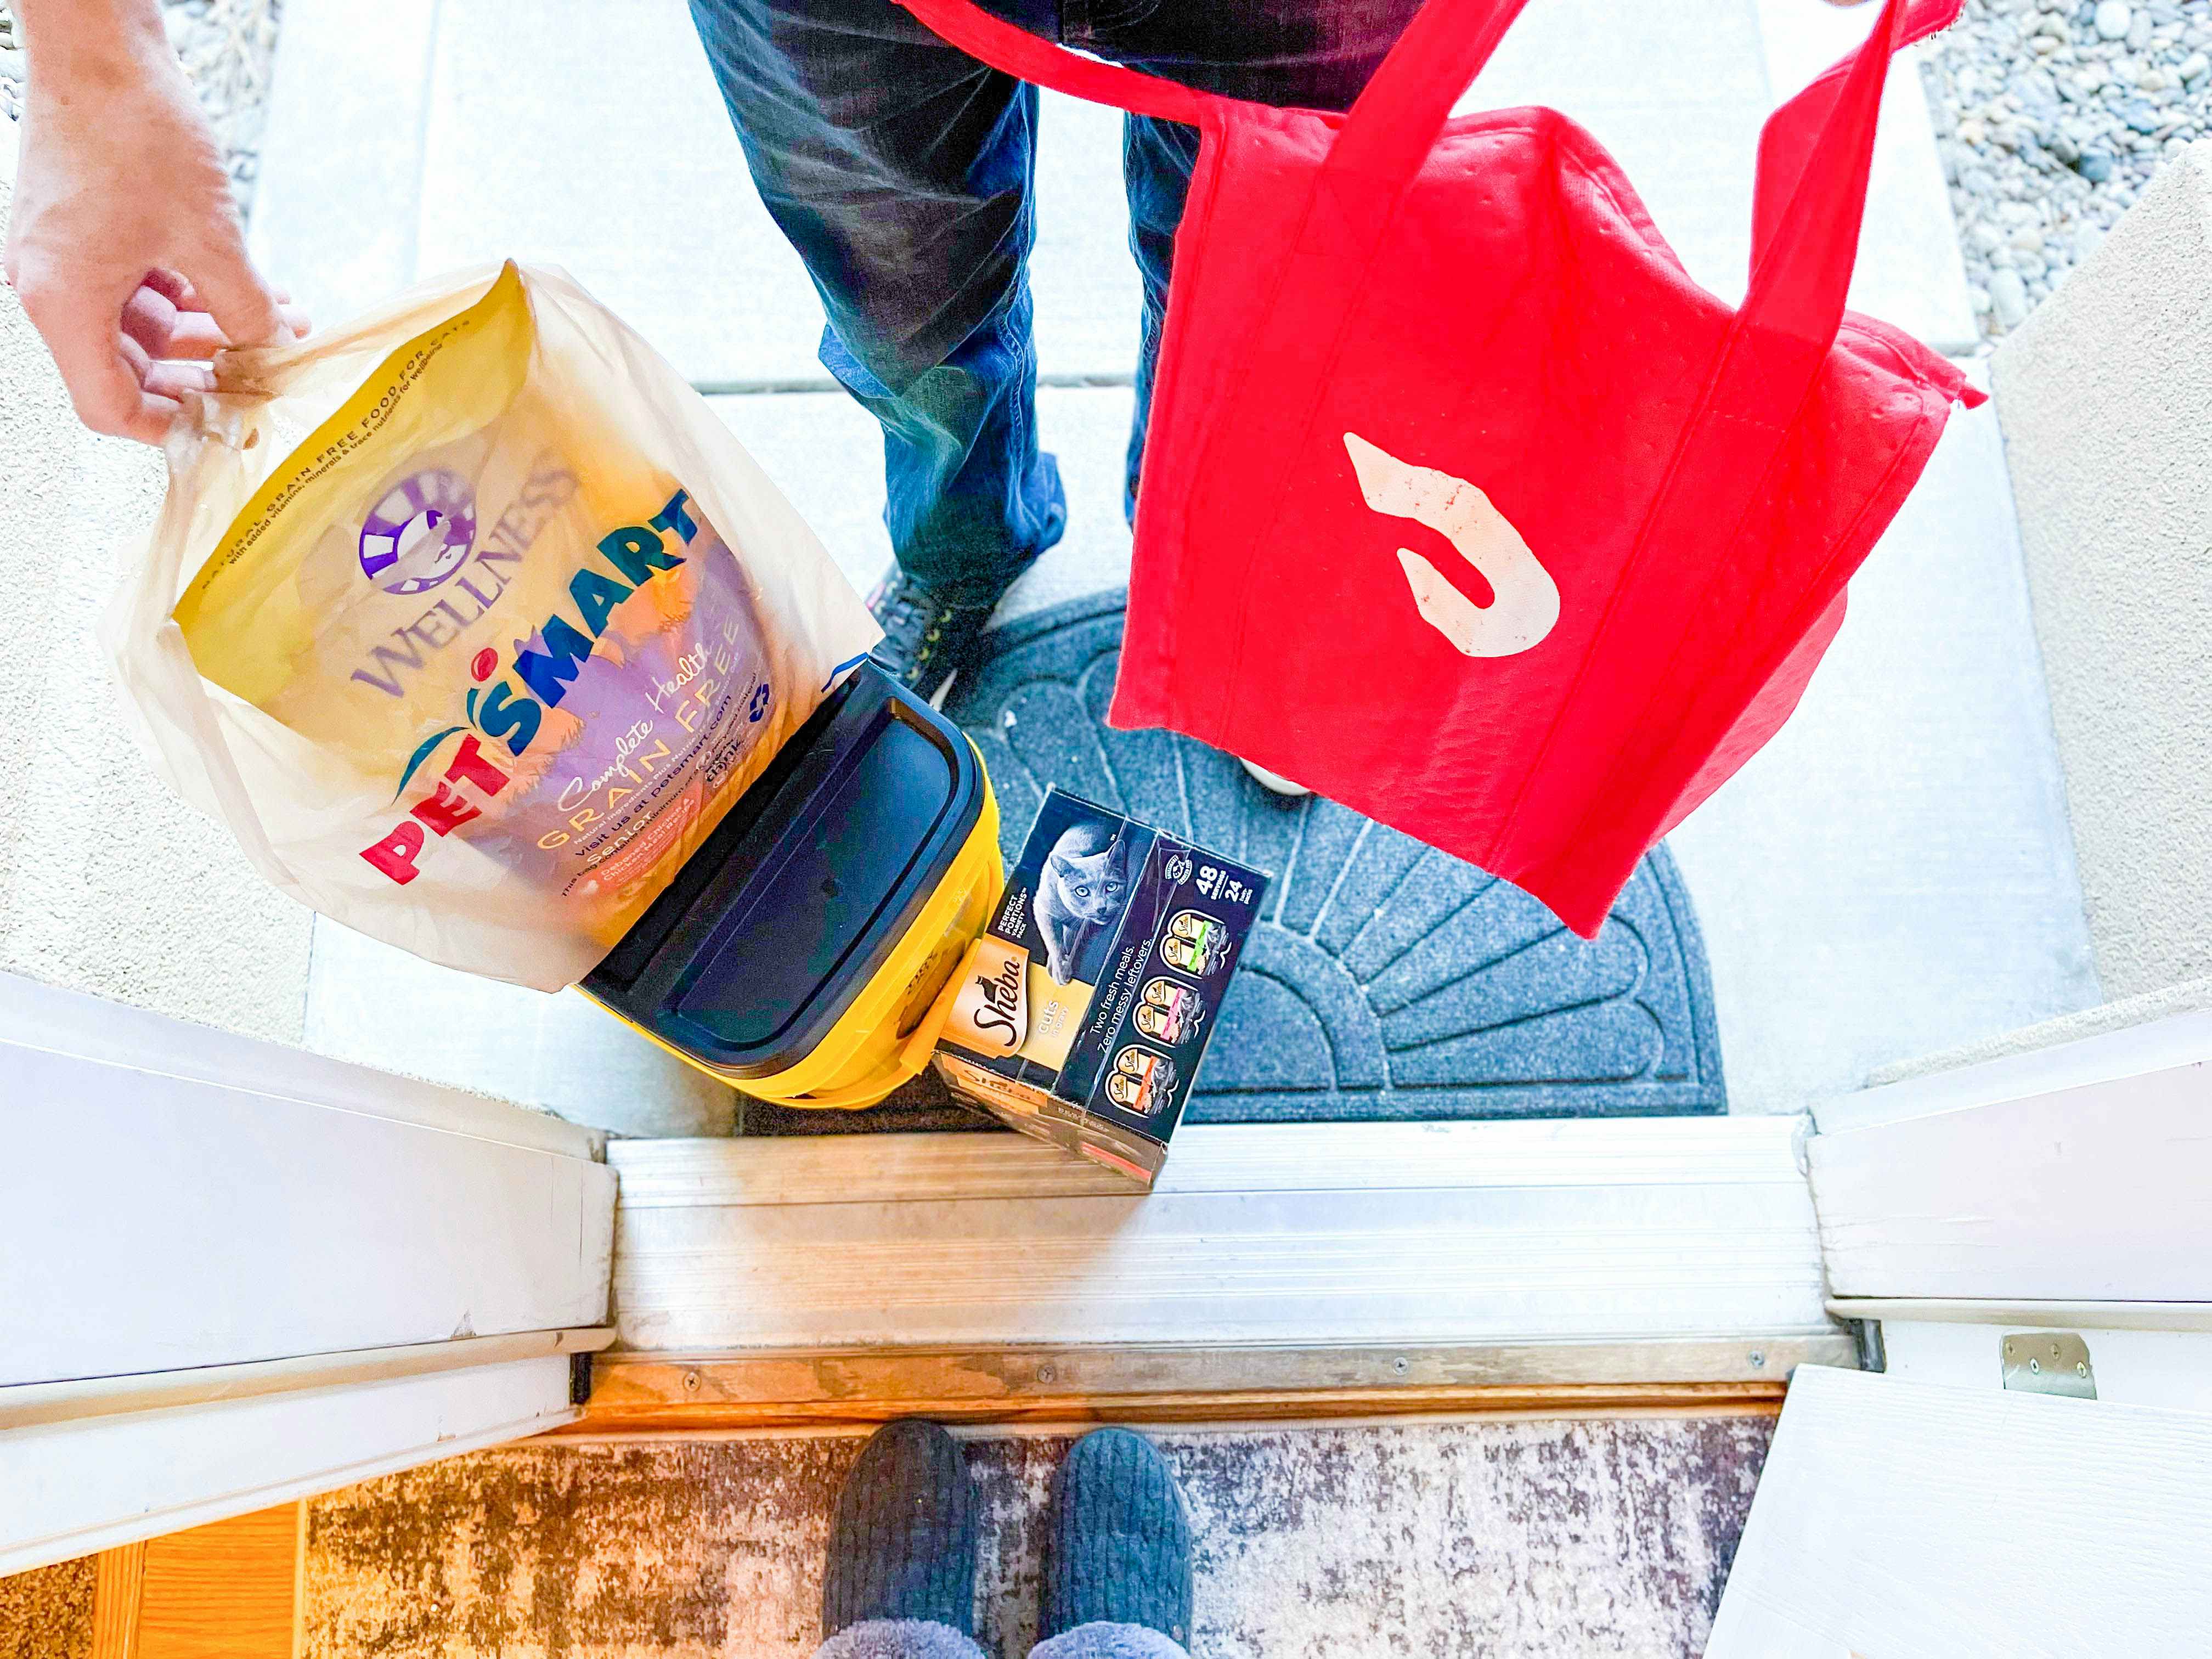 A Doordash delivery person dropping off a PetSmart delivery at a front door.